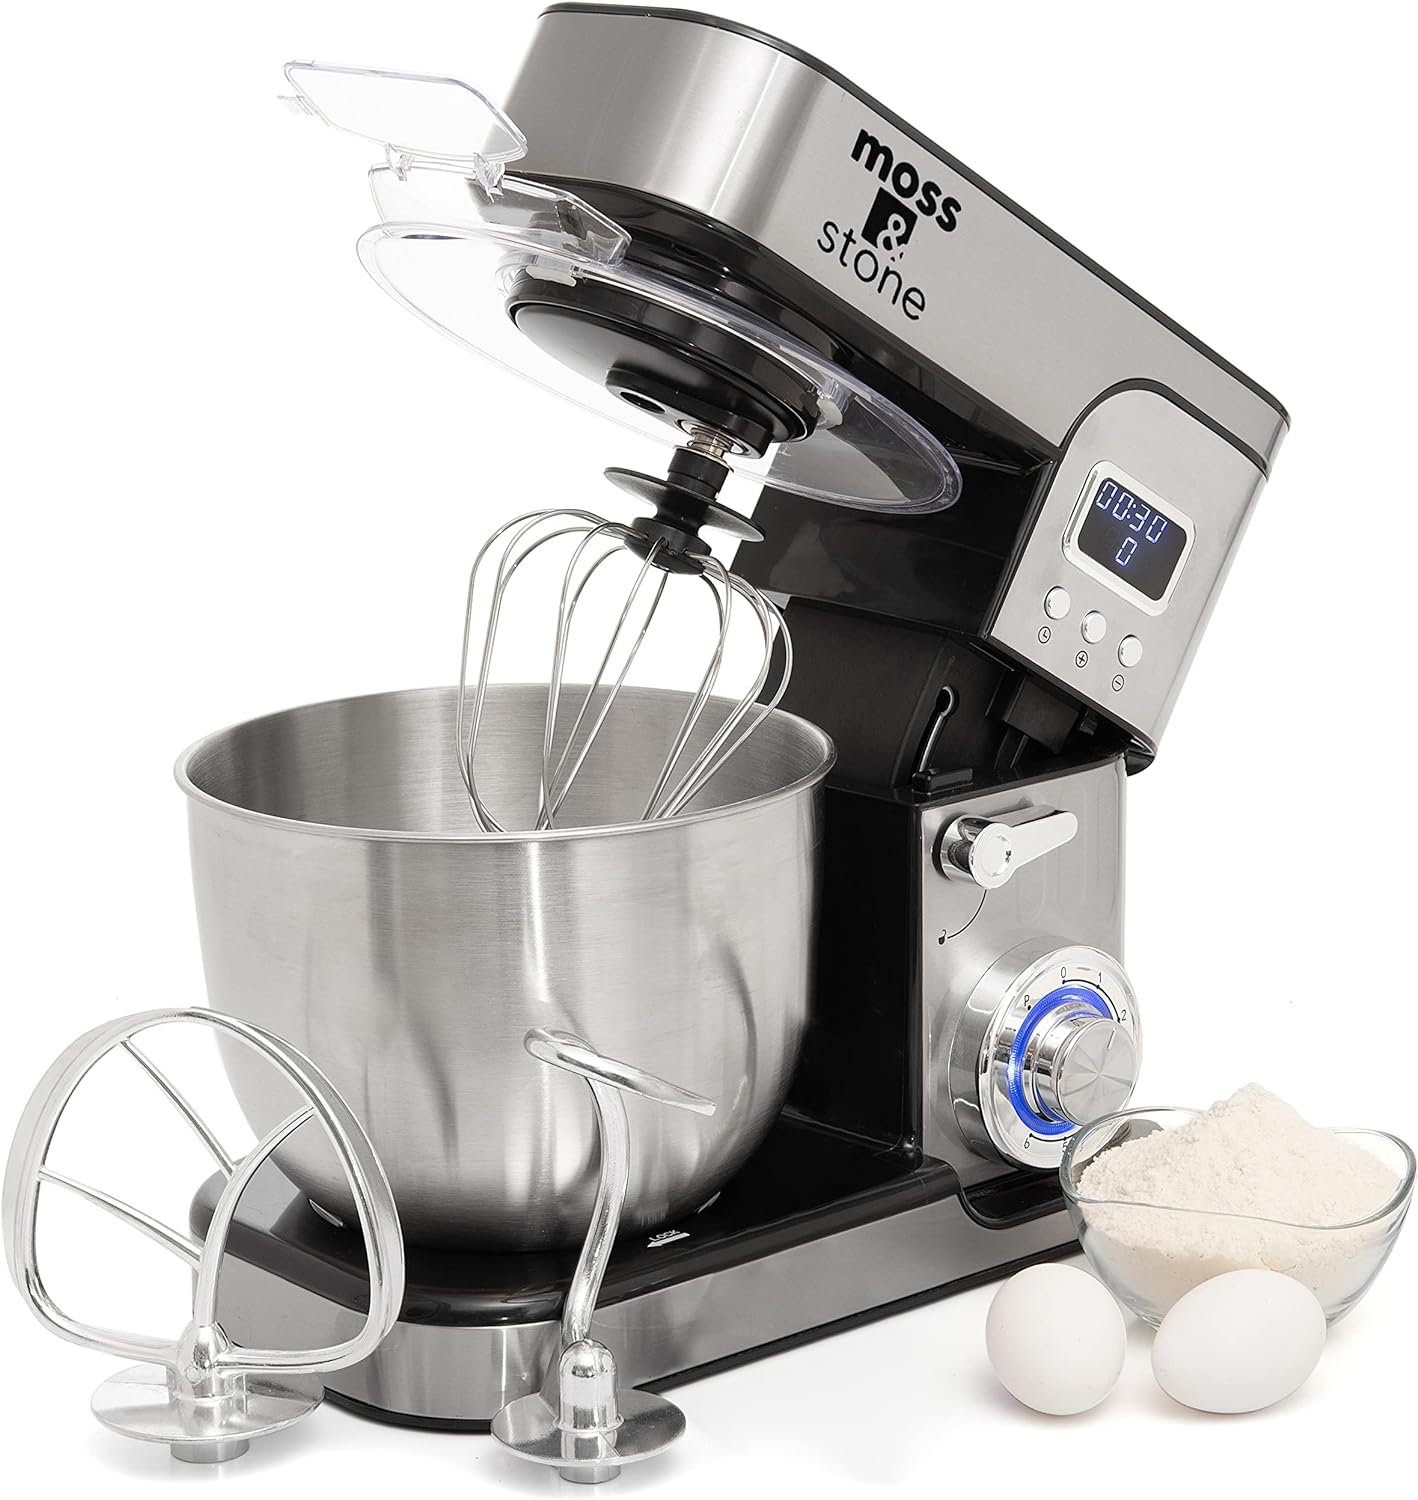 Moss  Stone Stand Mixer With Lcd Display, 6 Speed Electric Mixer With 5.5 Quart Stainless Steel Mixing Bowl, Kitchen Mixer With Dough Hook, Egg Whisk, Beater  Baking Spatula, Food Mixer With Timer